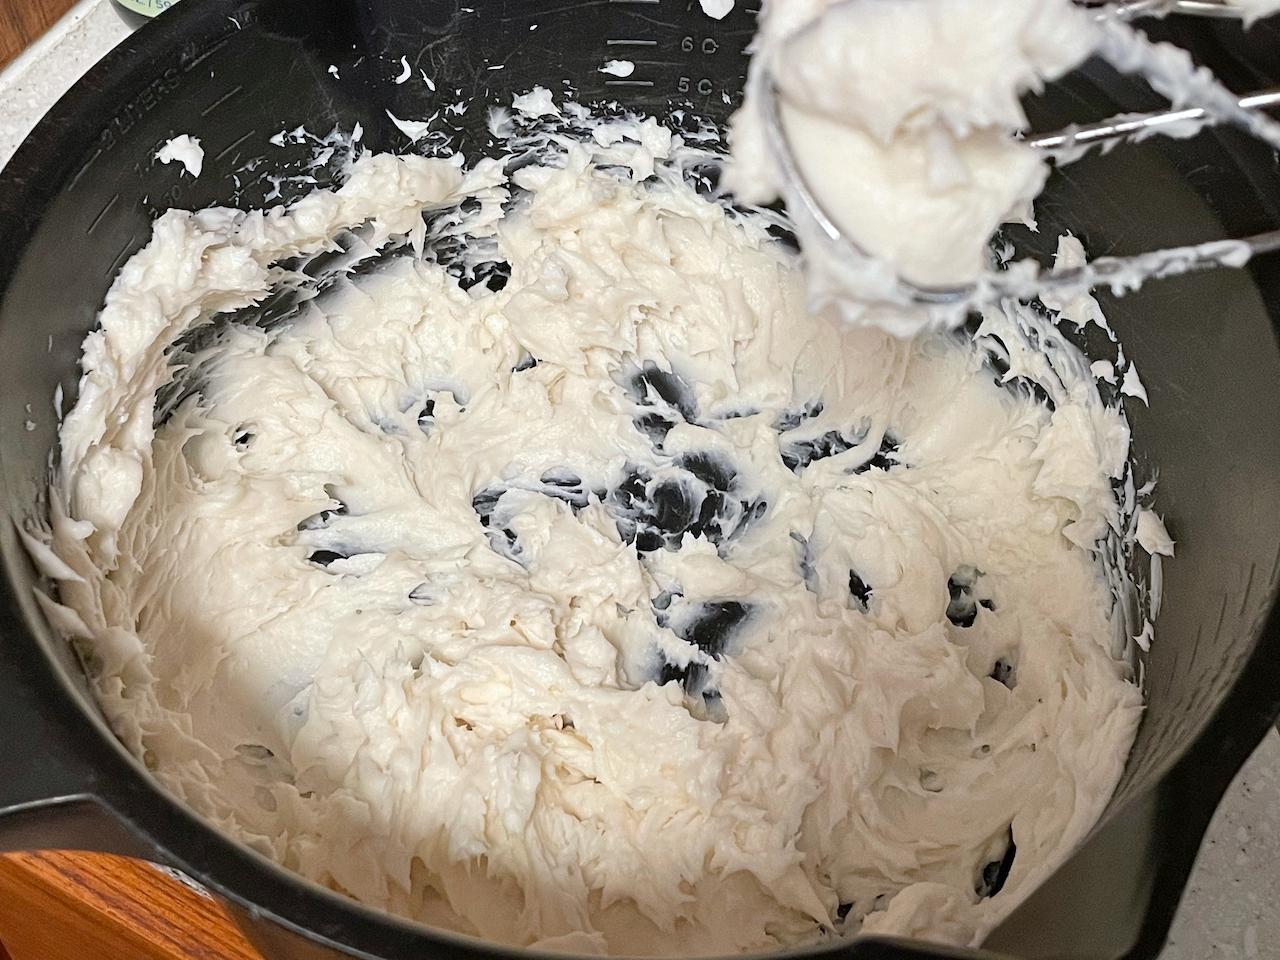 A black mixing bowl filled with whipped dairy free cream cheese alternative.